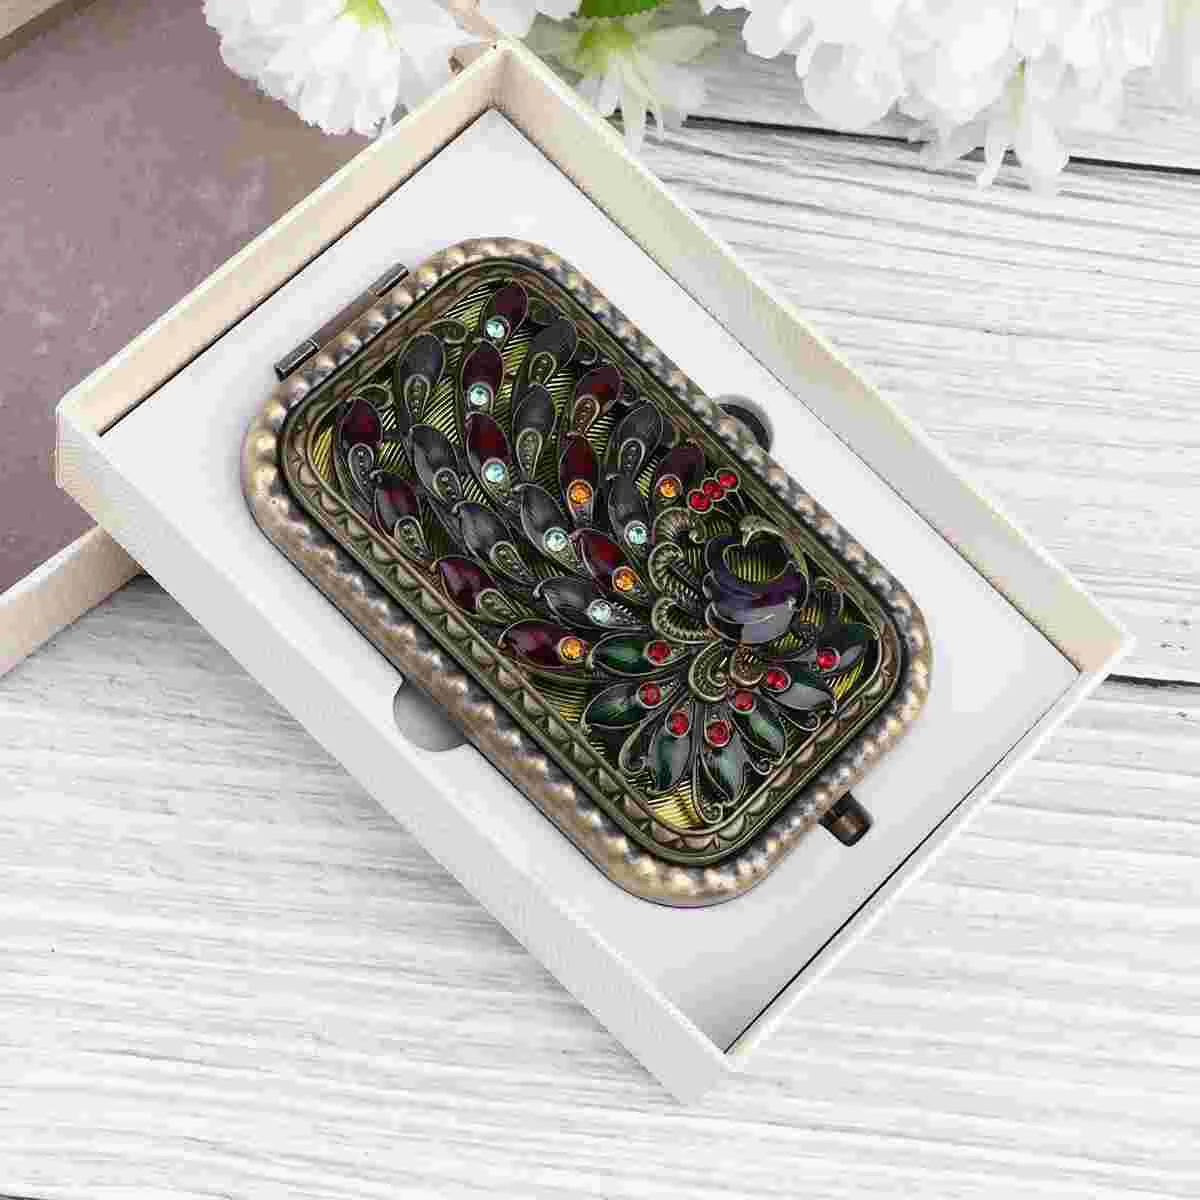 hot sale outdoor leather cheap coin purse coin bag drawstring pouch calabash jewelry packing bags Mirror Compact Makeup Vintage Pocket Purse Foldable Double Mini Women Vanity Portable Side Travel Handheld Purses Mirrors